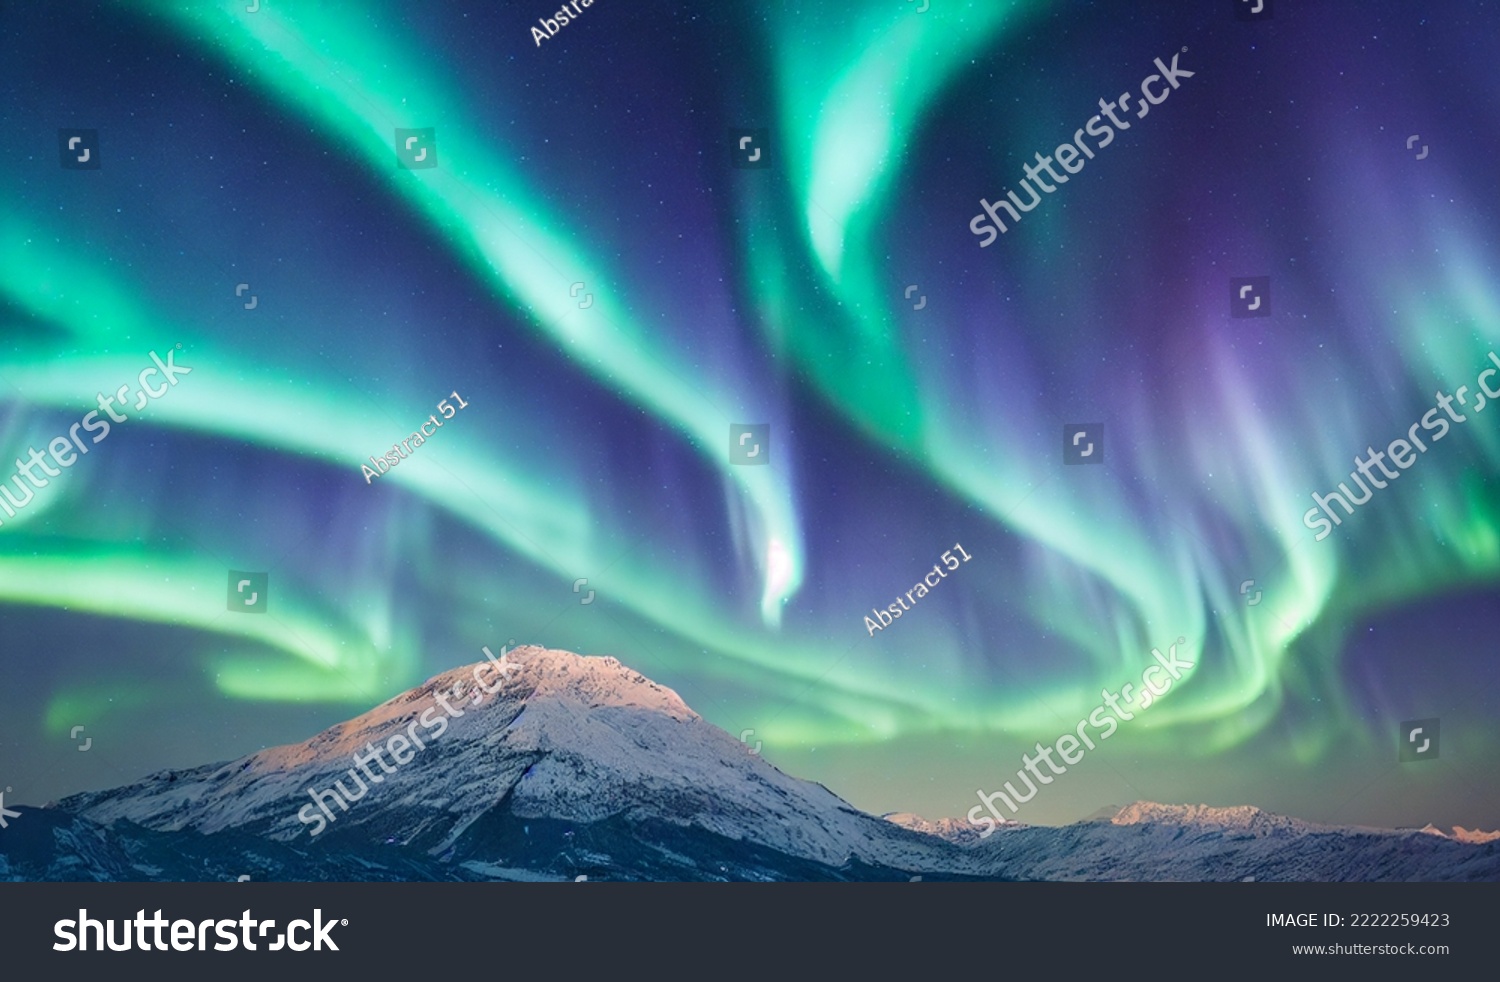 Northern Lights over snowy mountains. Aurora borealis with starry in the night sky. Fantastic Winter Epic Magical Landscape of snowy Mountains.   #2222259423